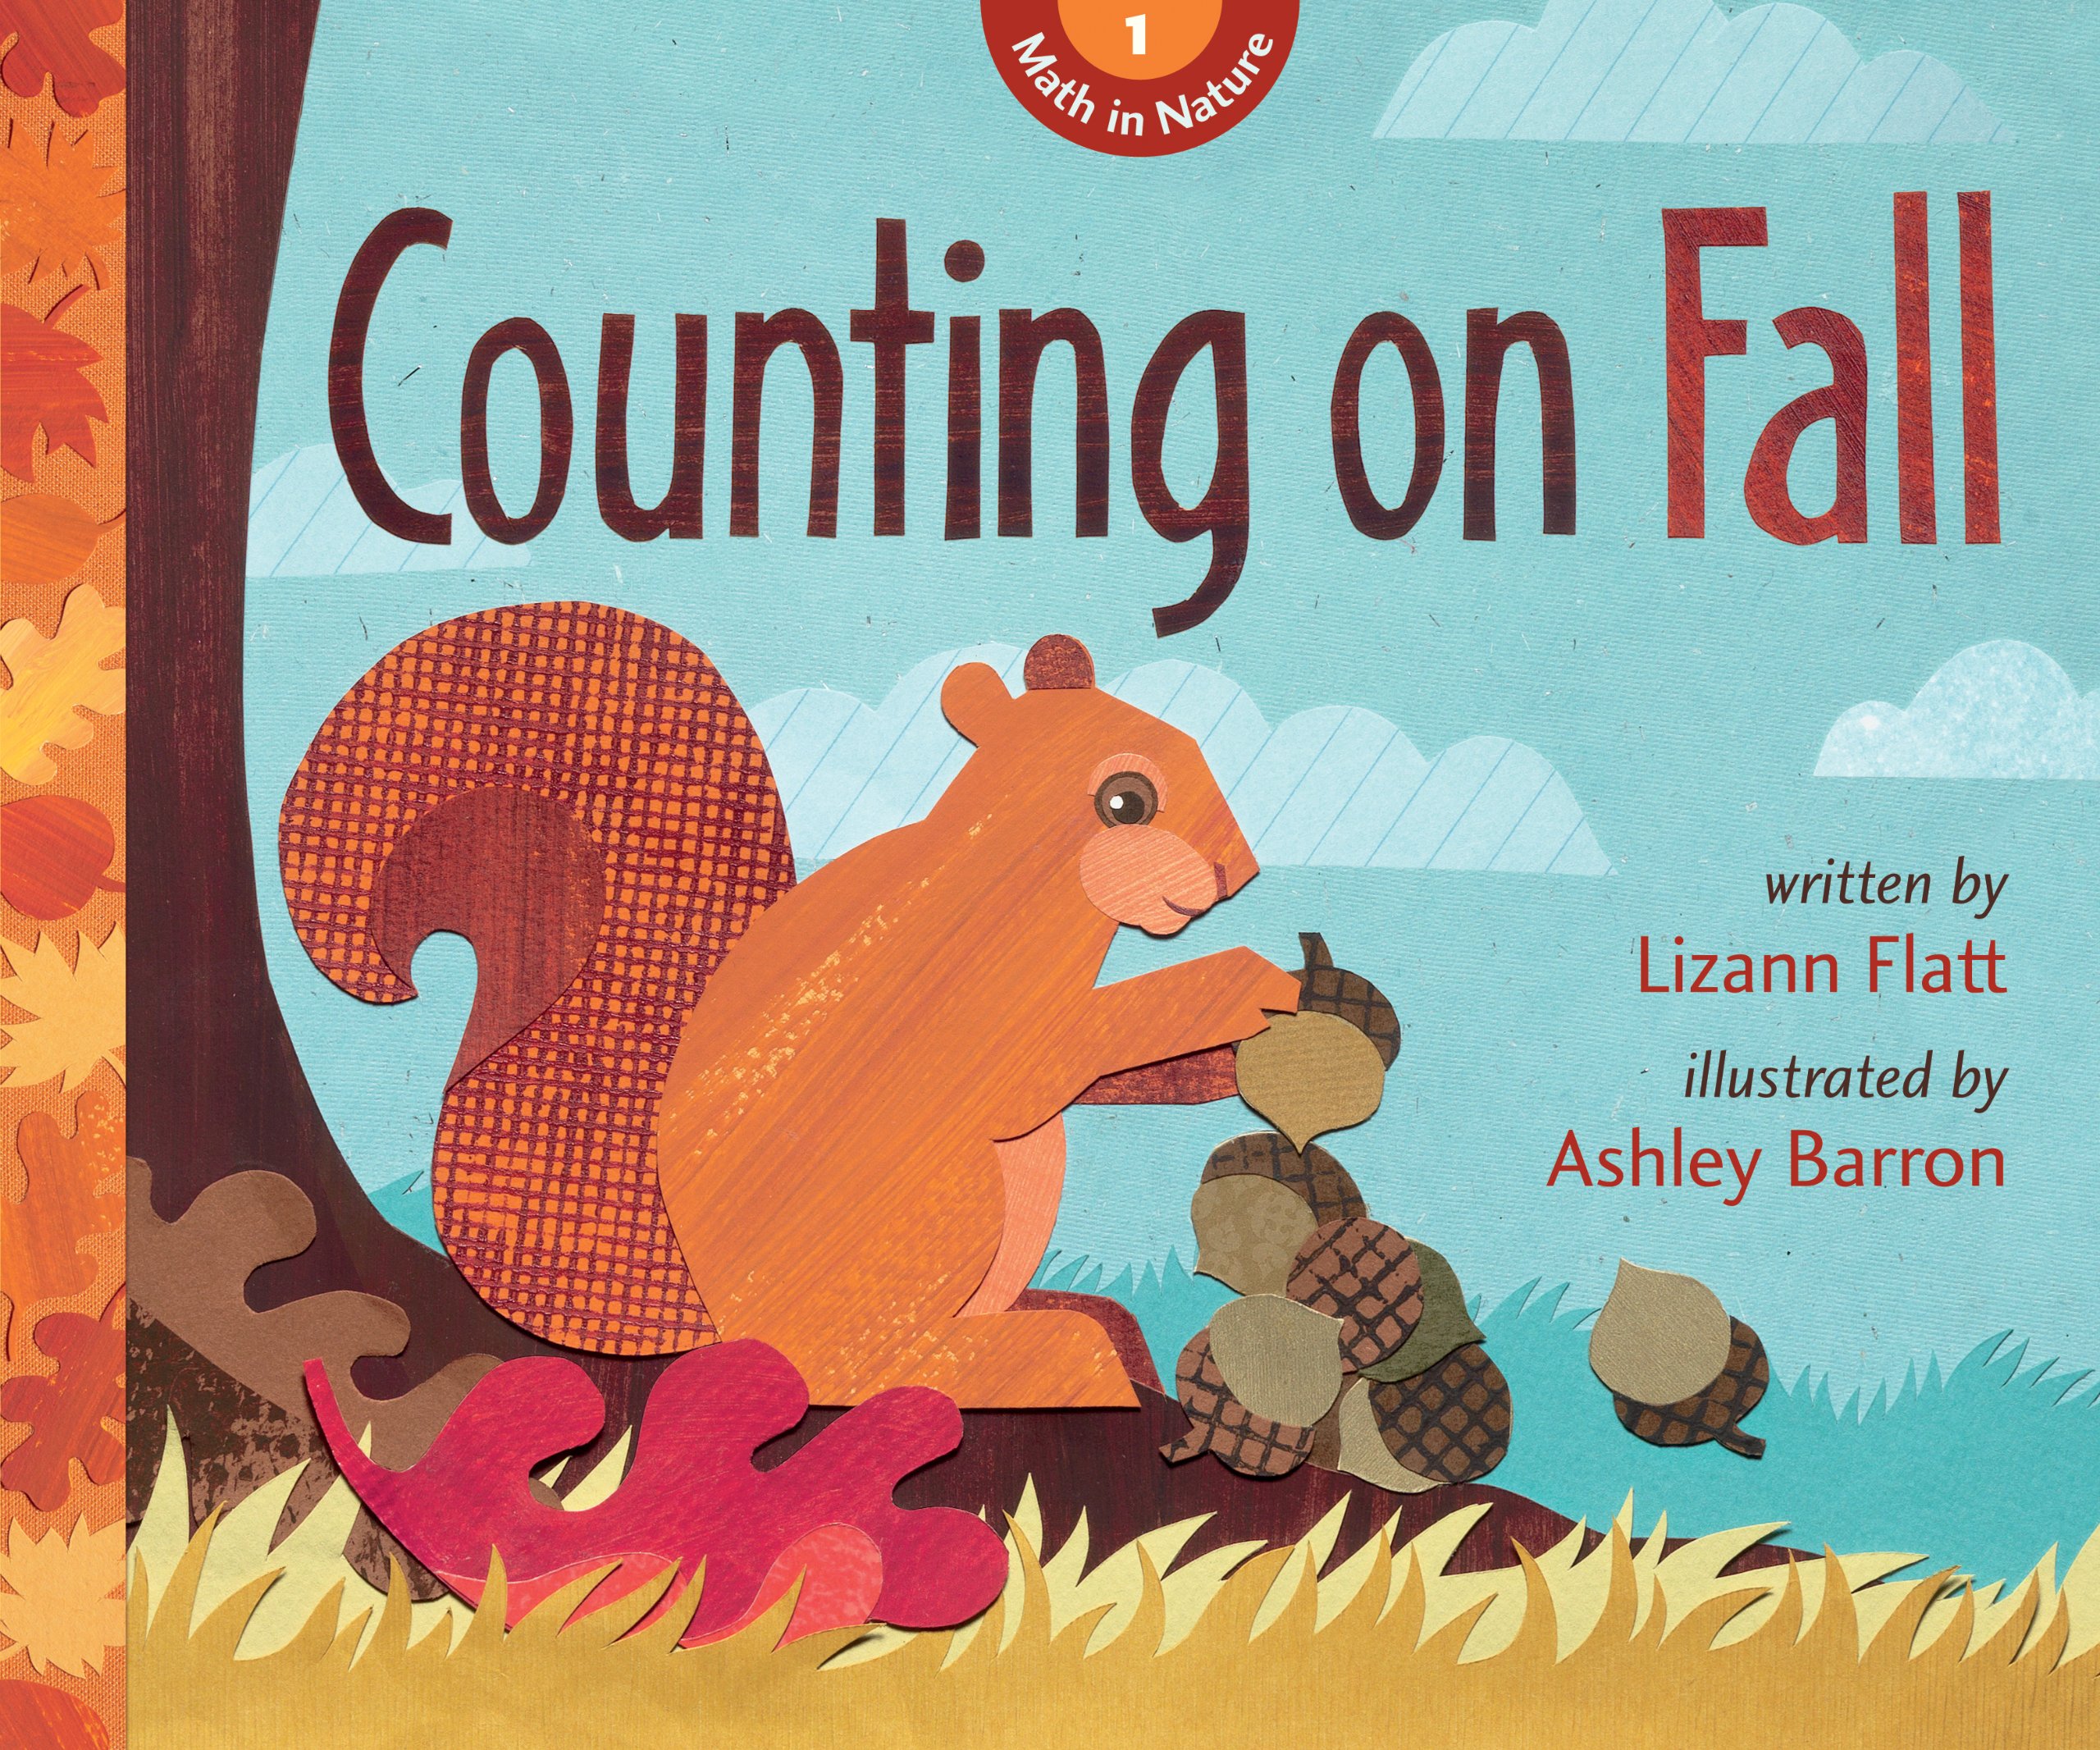 speech and language teaching concepts for Counting on Fall in speech therapy​ ​